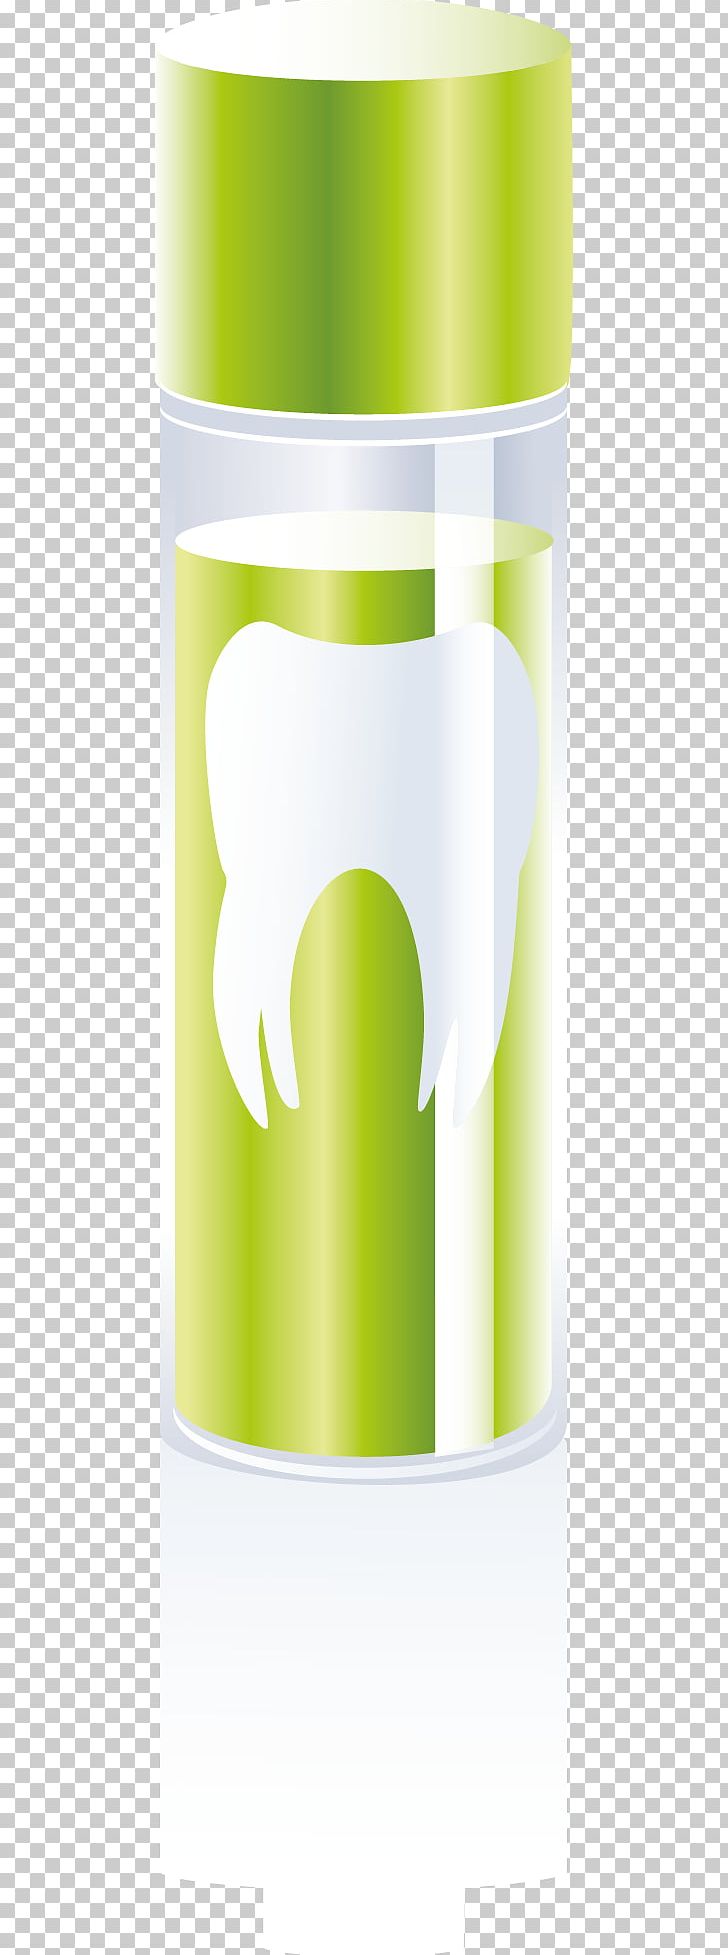 Mouthwash Tooth Euclidean PNG, Clipart, Beautiful Vector, Beauty, Beauty Salon, Bottle, Bottles Free PNG Download